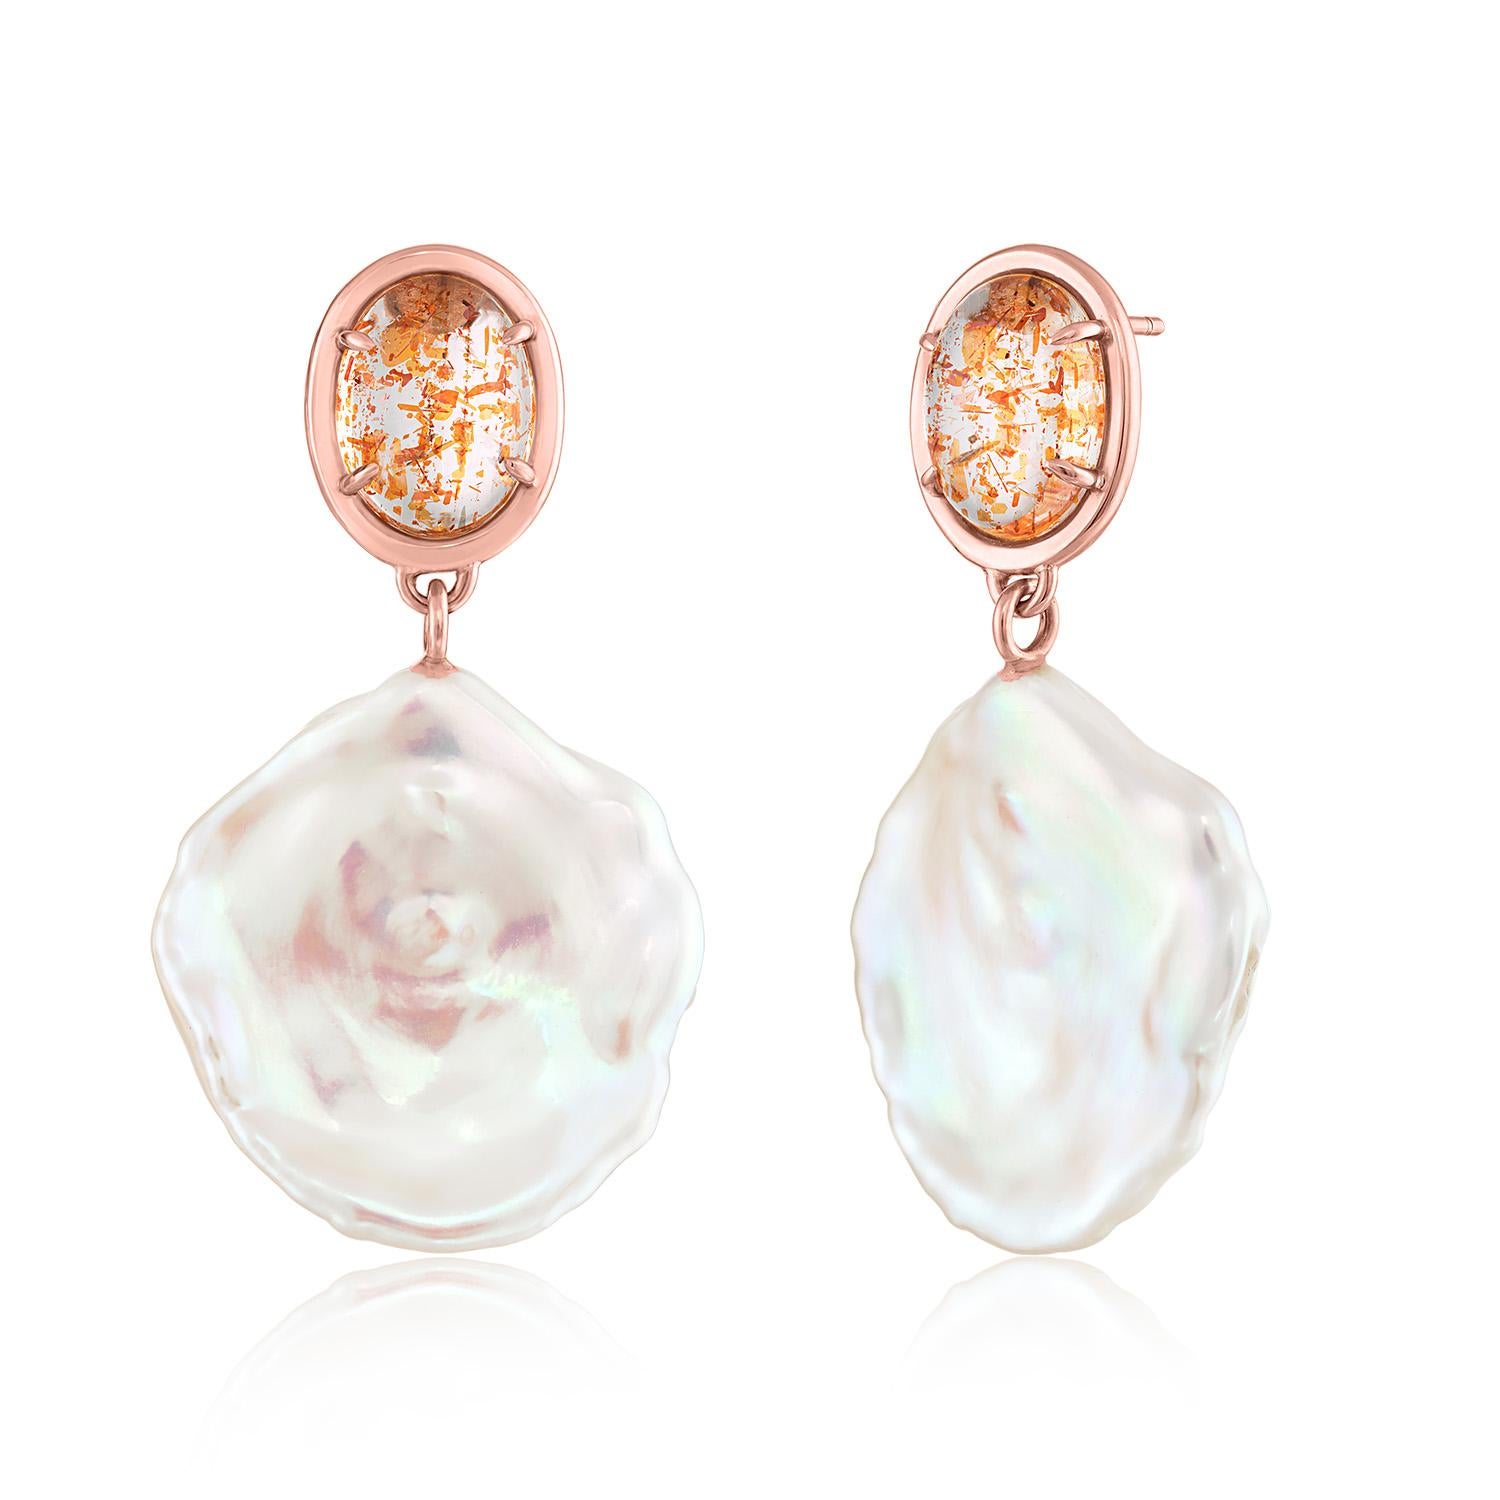 Cabochon Sunstone & Baroque Coin Pearl Drop Earrings Set in Rose Gold For Sale